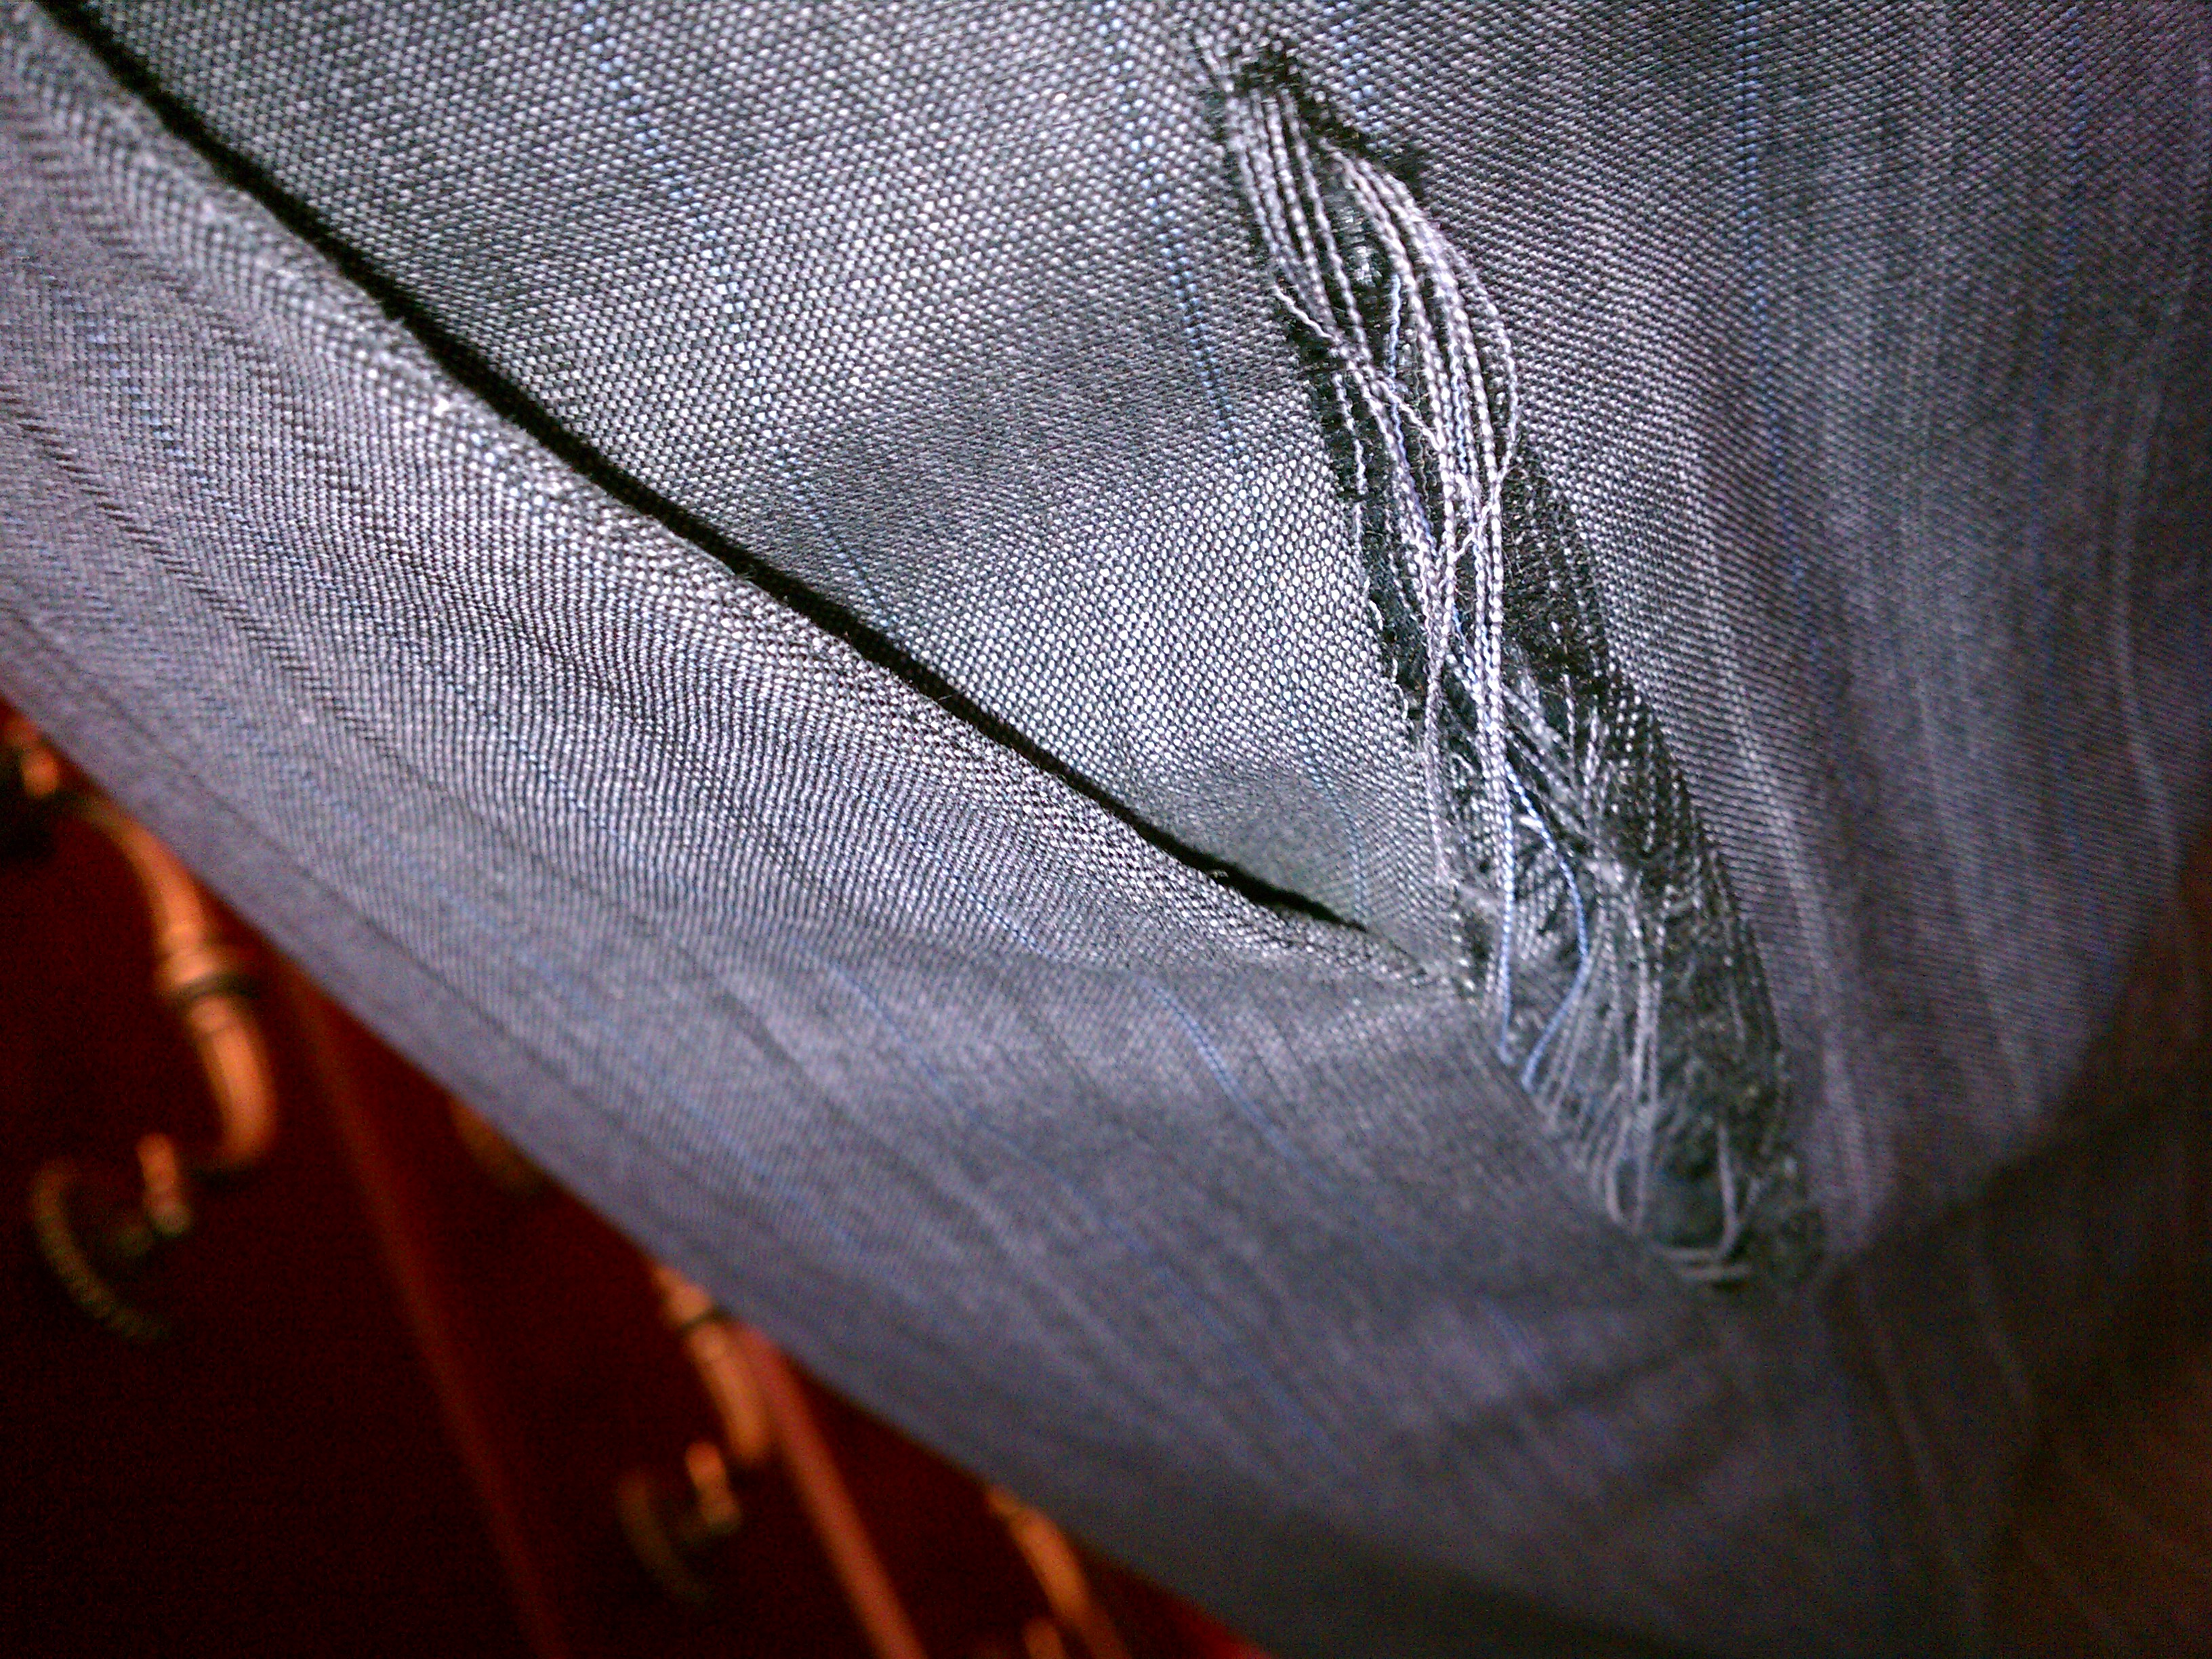 Ripped suit pants...can they be fixed? | Styleforum